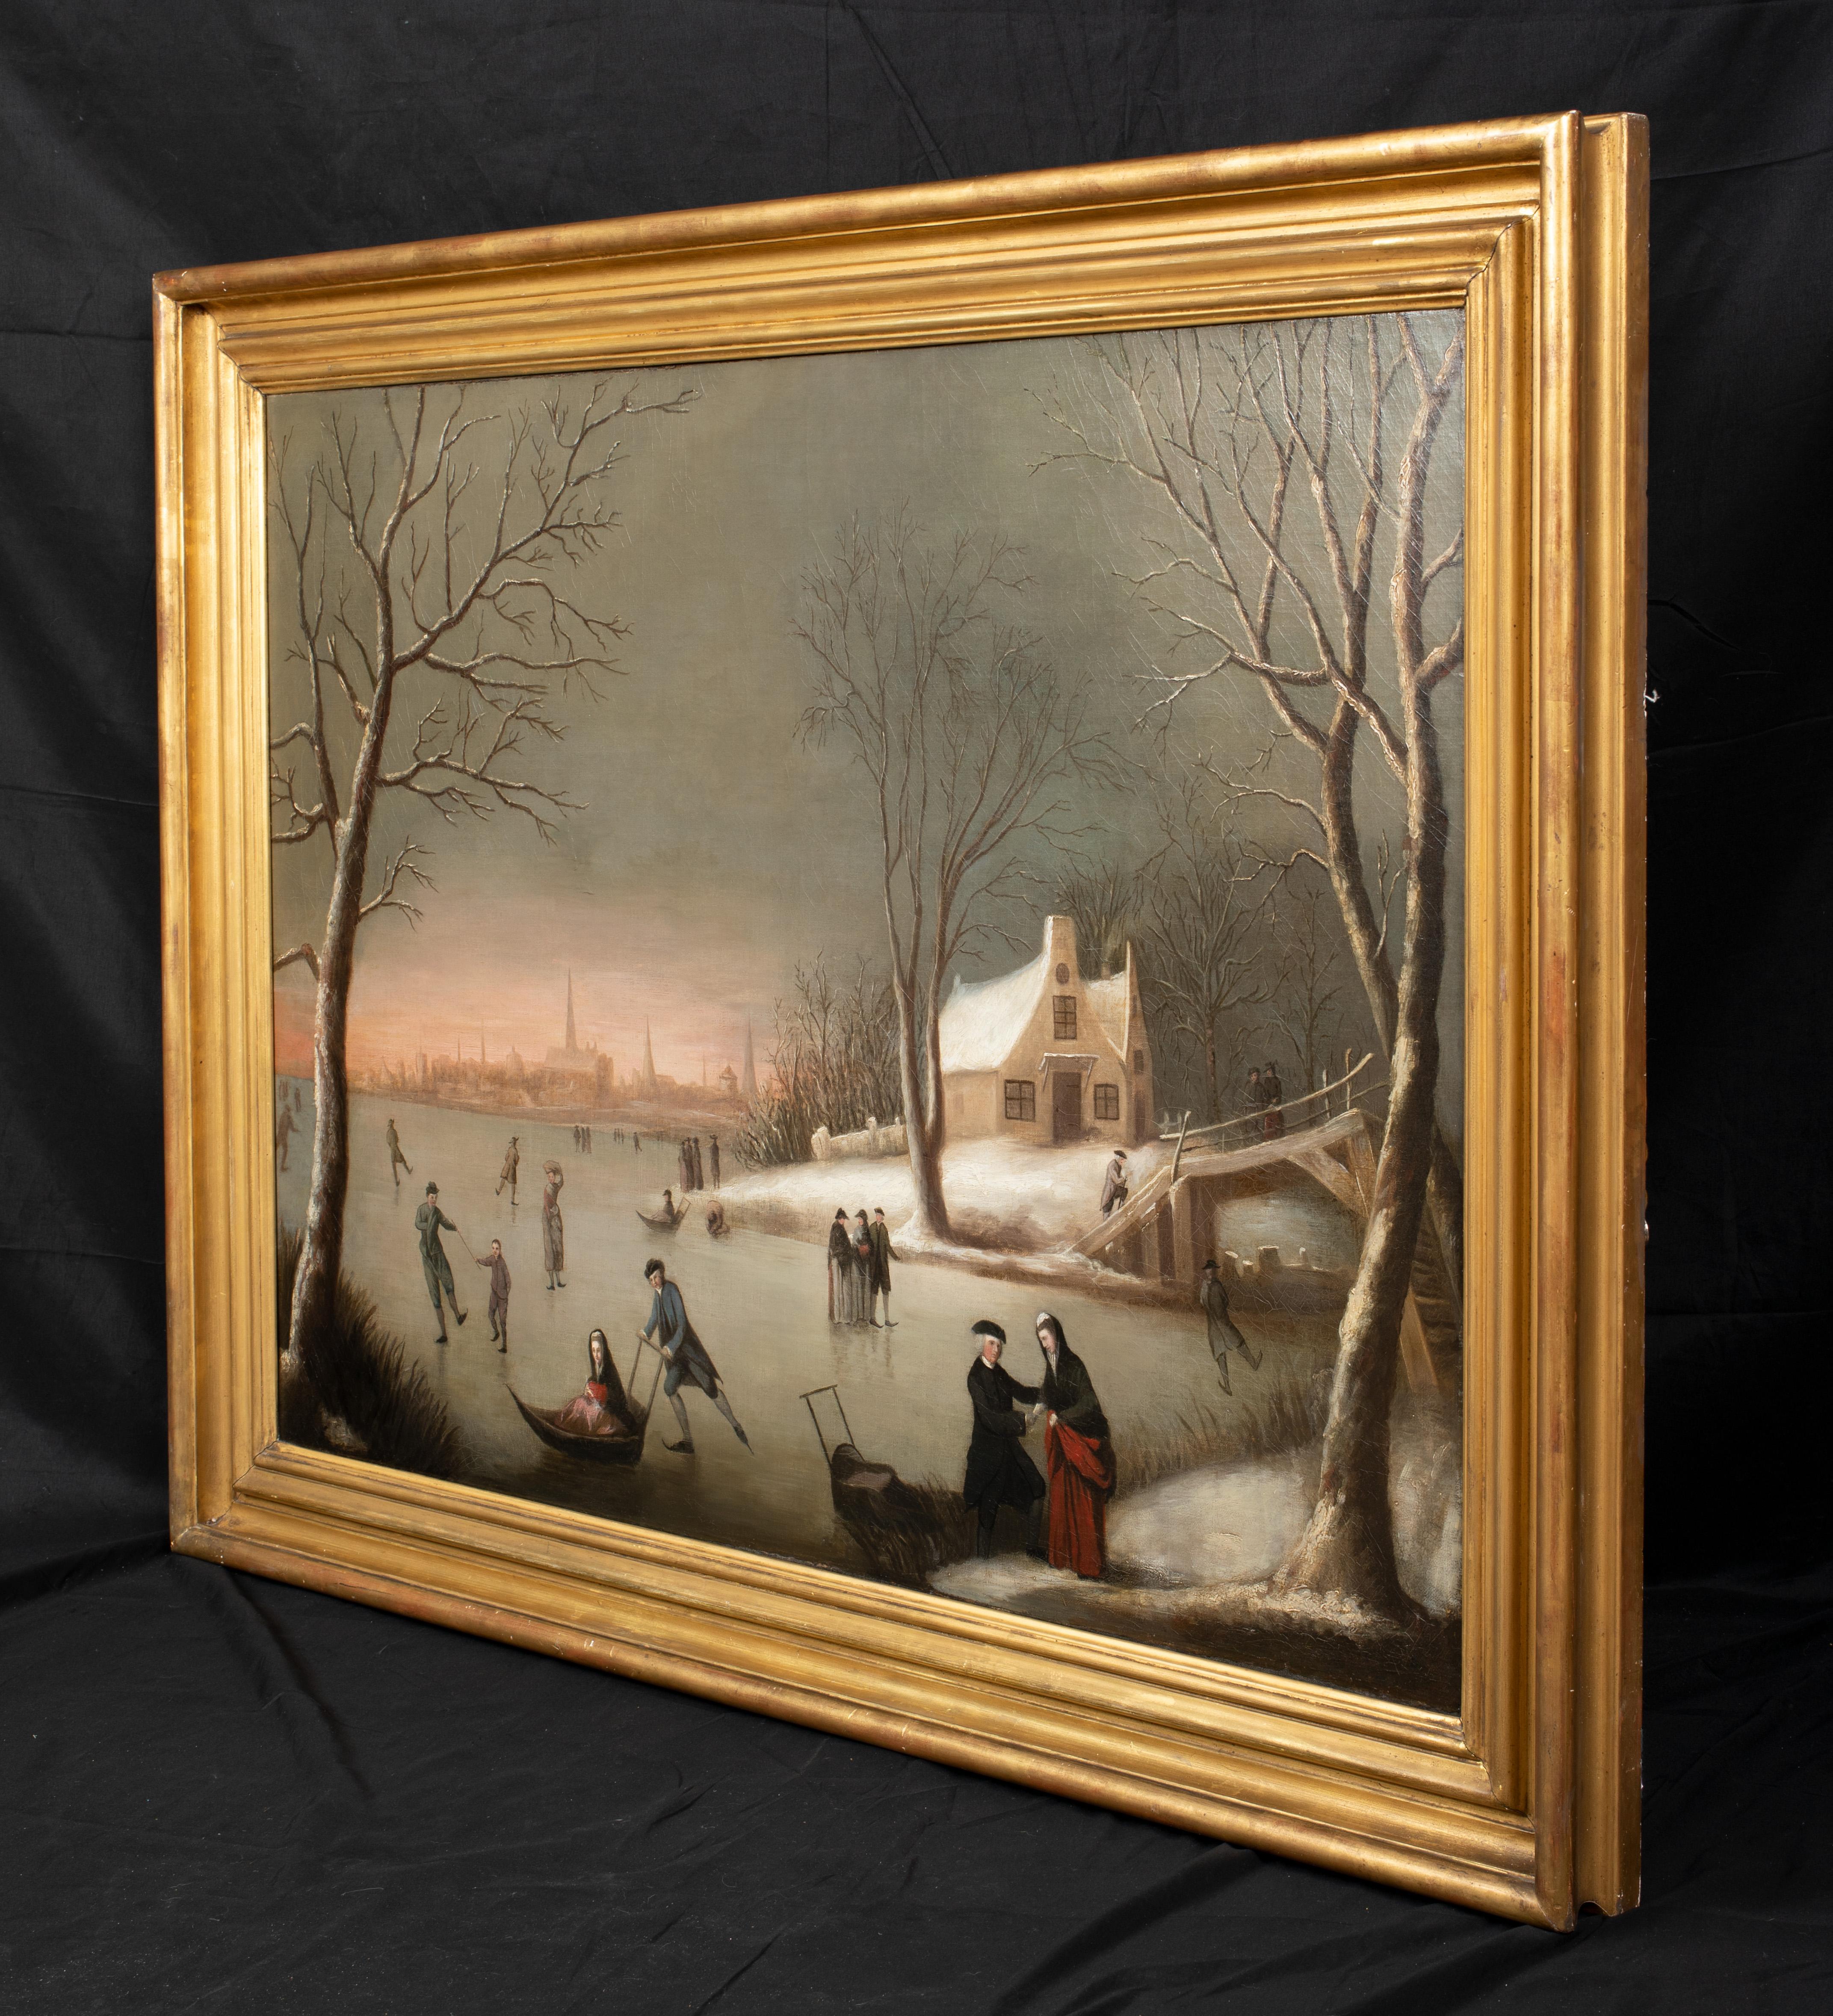 Figures Ice Skating IN A Frozen Winter Landscape, 18th Century  - Brown Portrait Painting by Unknown